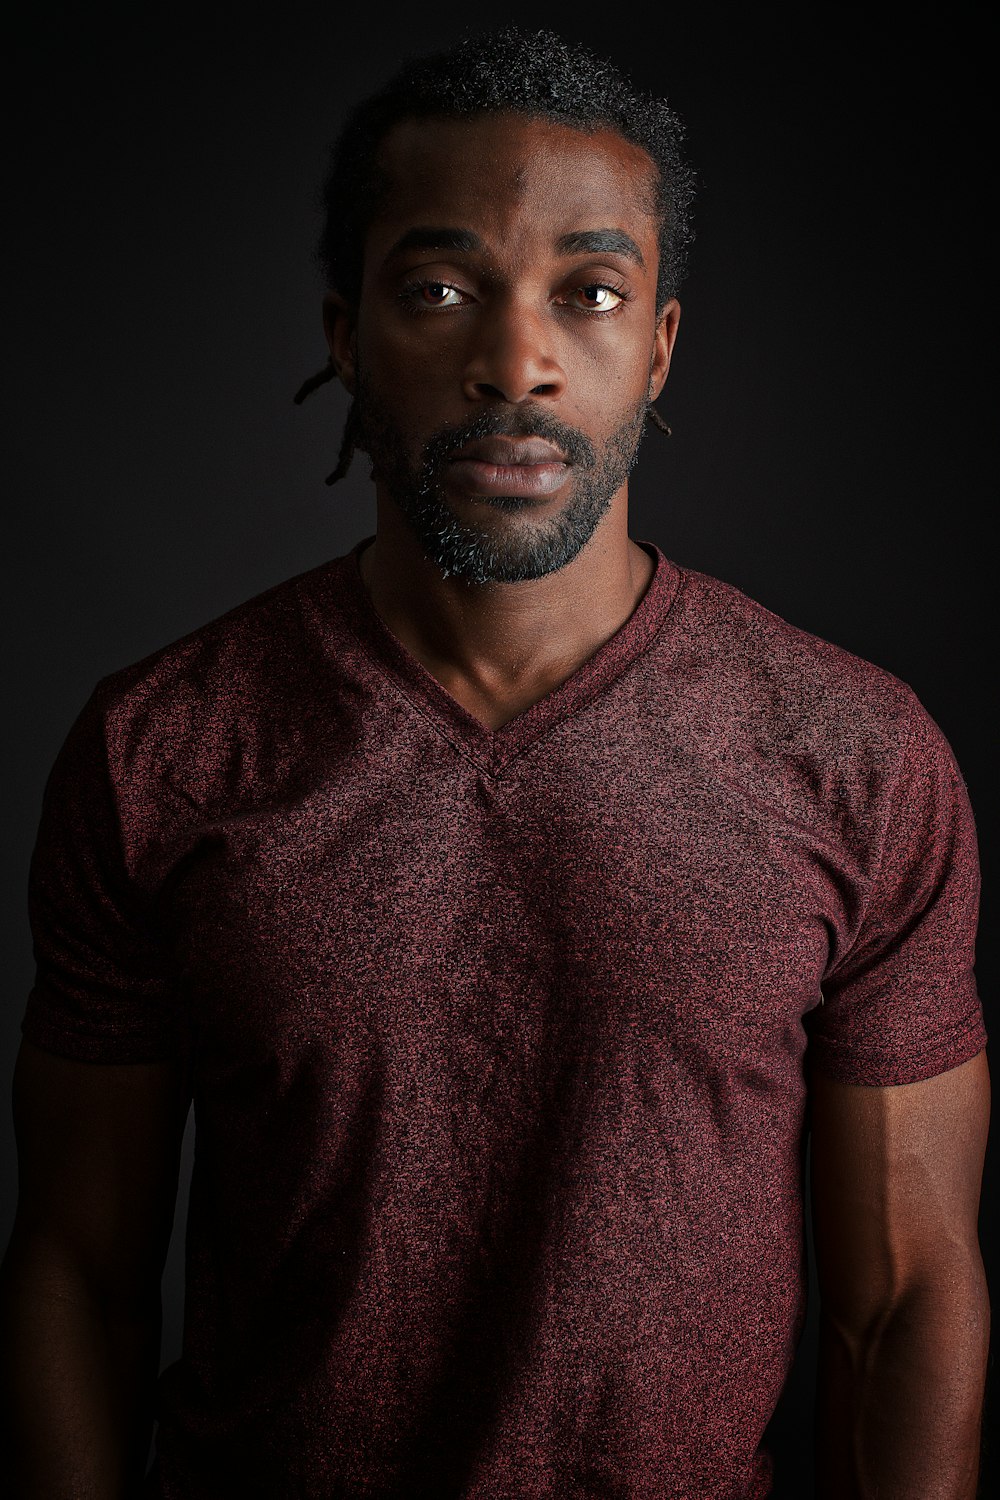 man wearing red v-neck shirt close-up photography